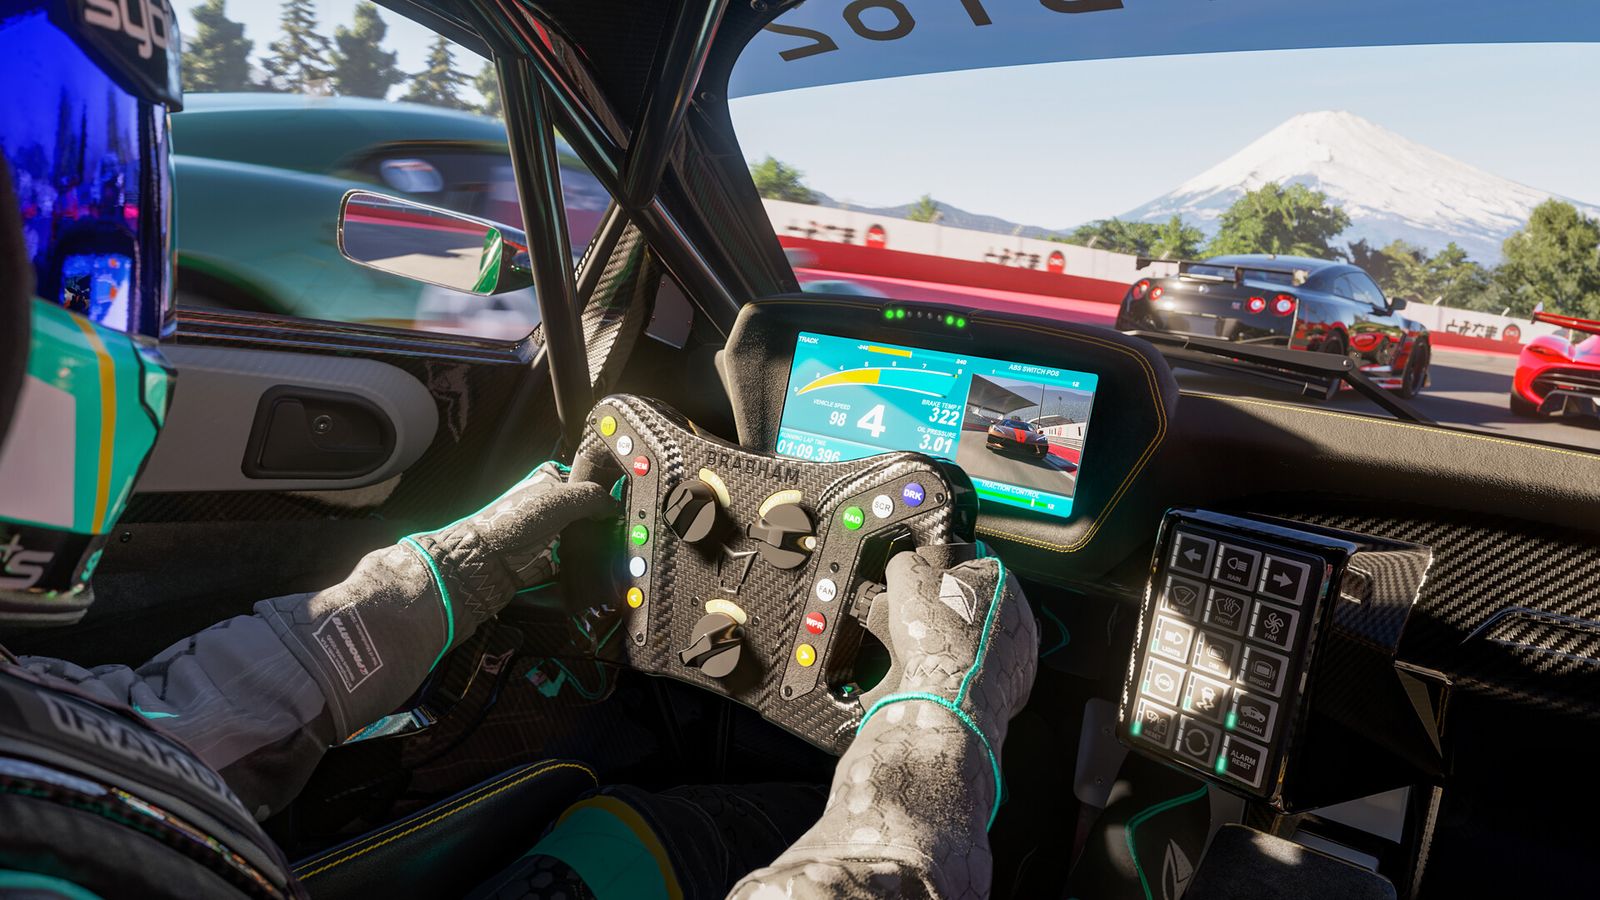 Forza Motorsport early access